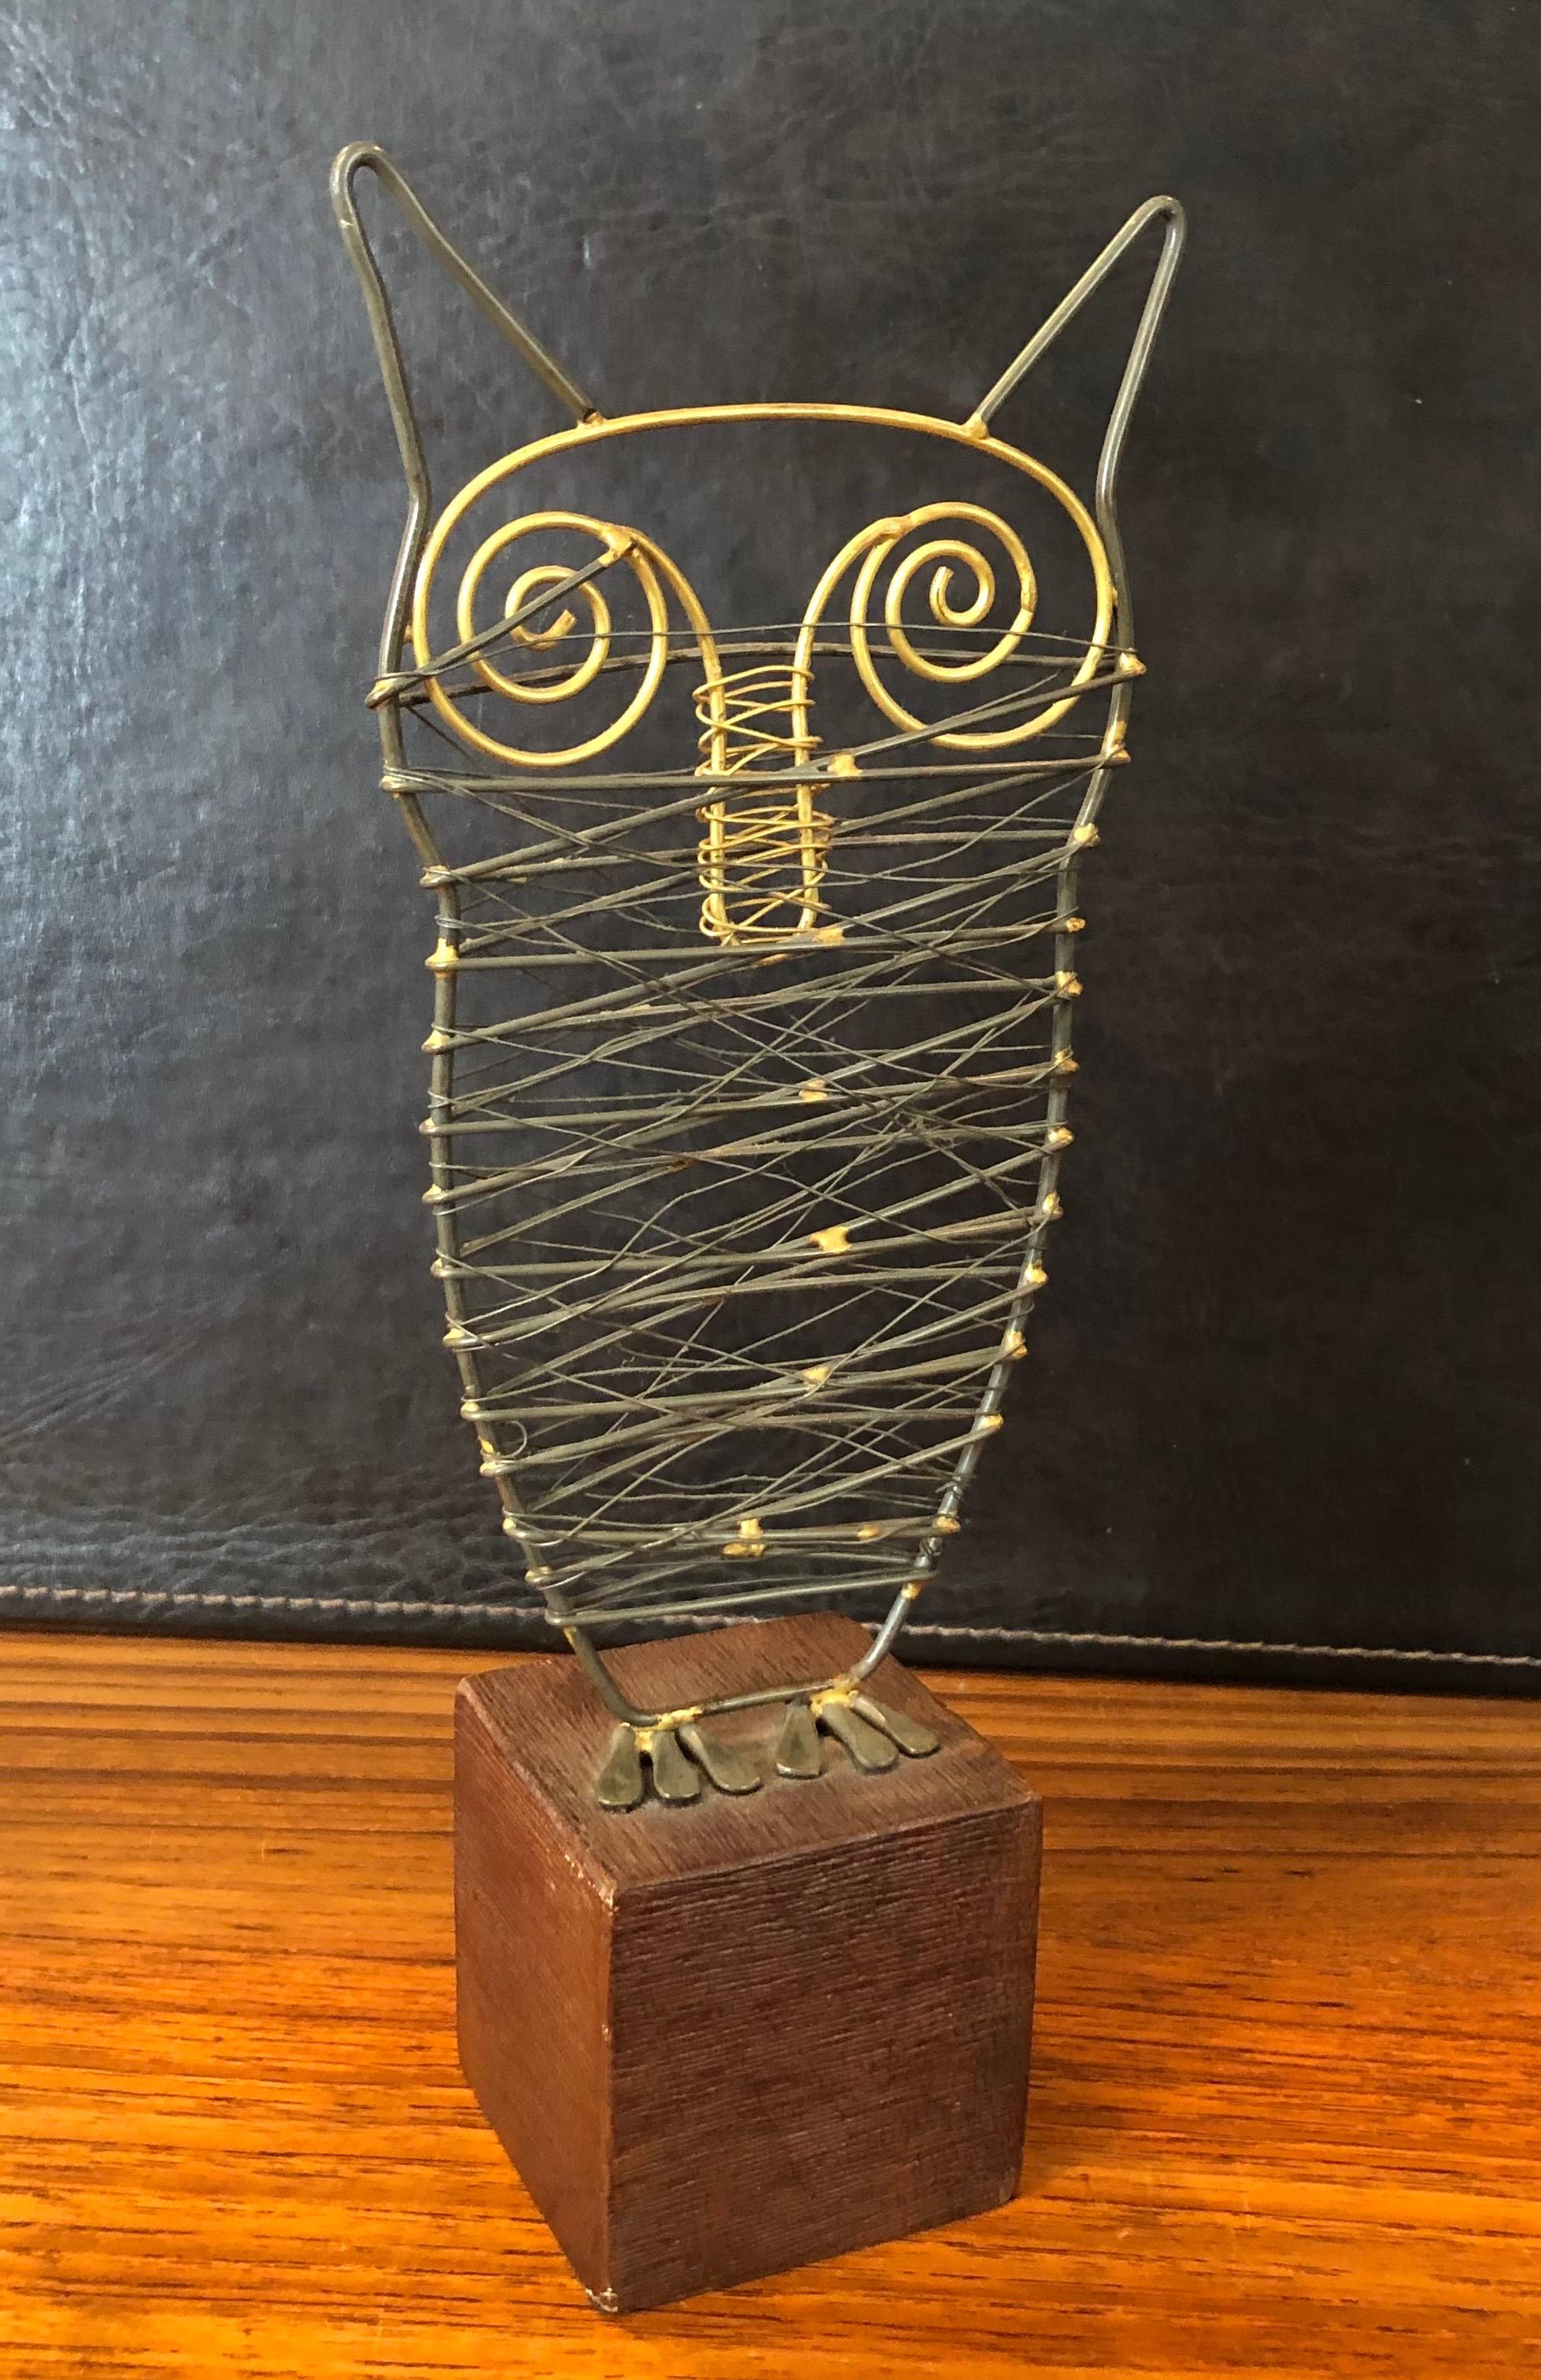 Whimsical Brutalist brass and metal welded owl sculpture on wood base in the style of C. Jere, circa 1970s. #1261.